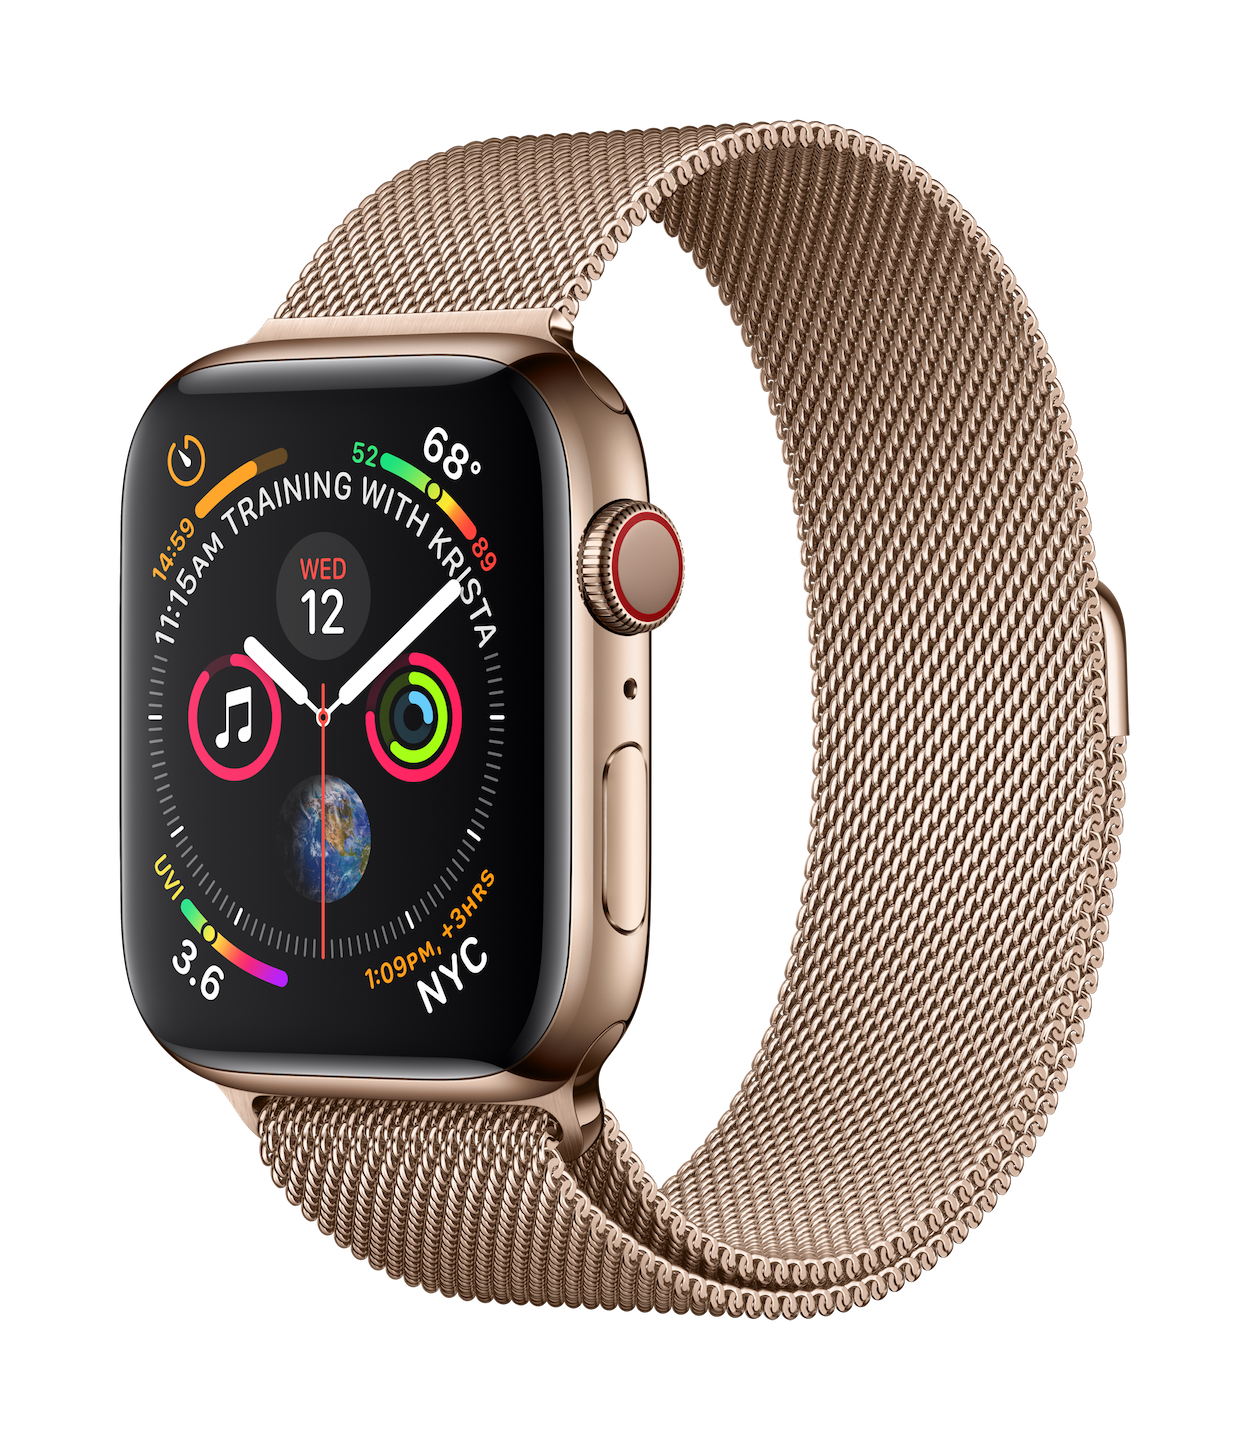 US$399 Apple Watch Series 4 Has a 30% Larger Display ... - Apple Watch